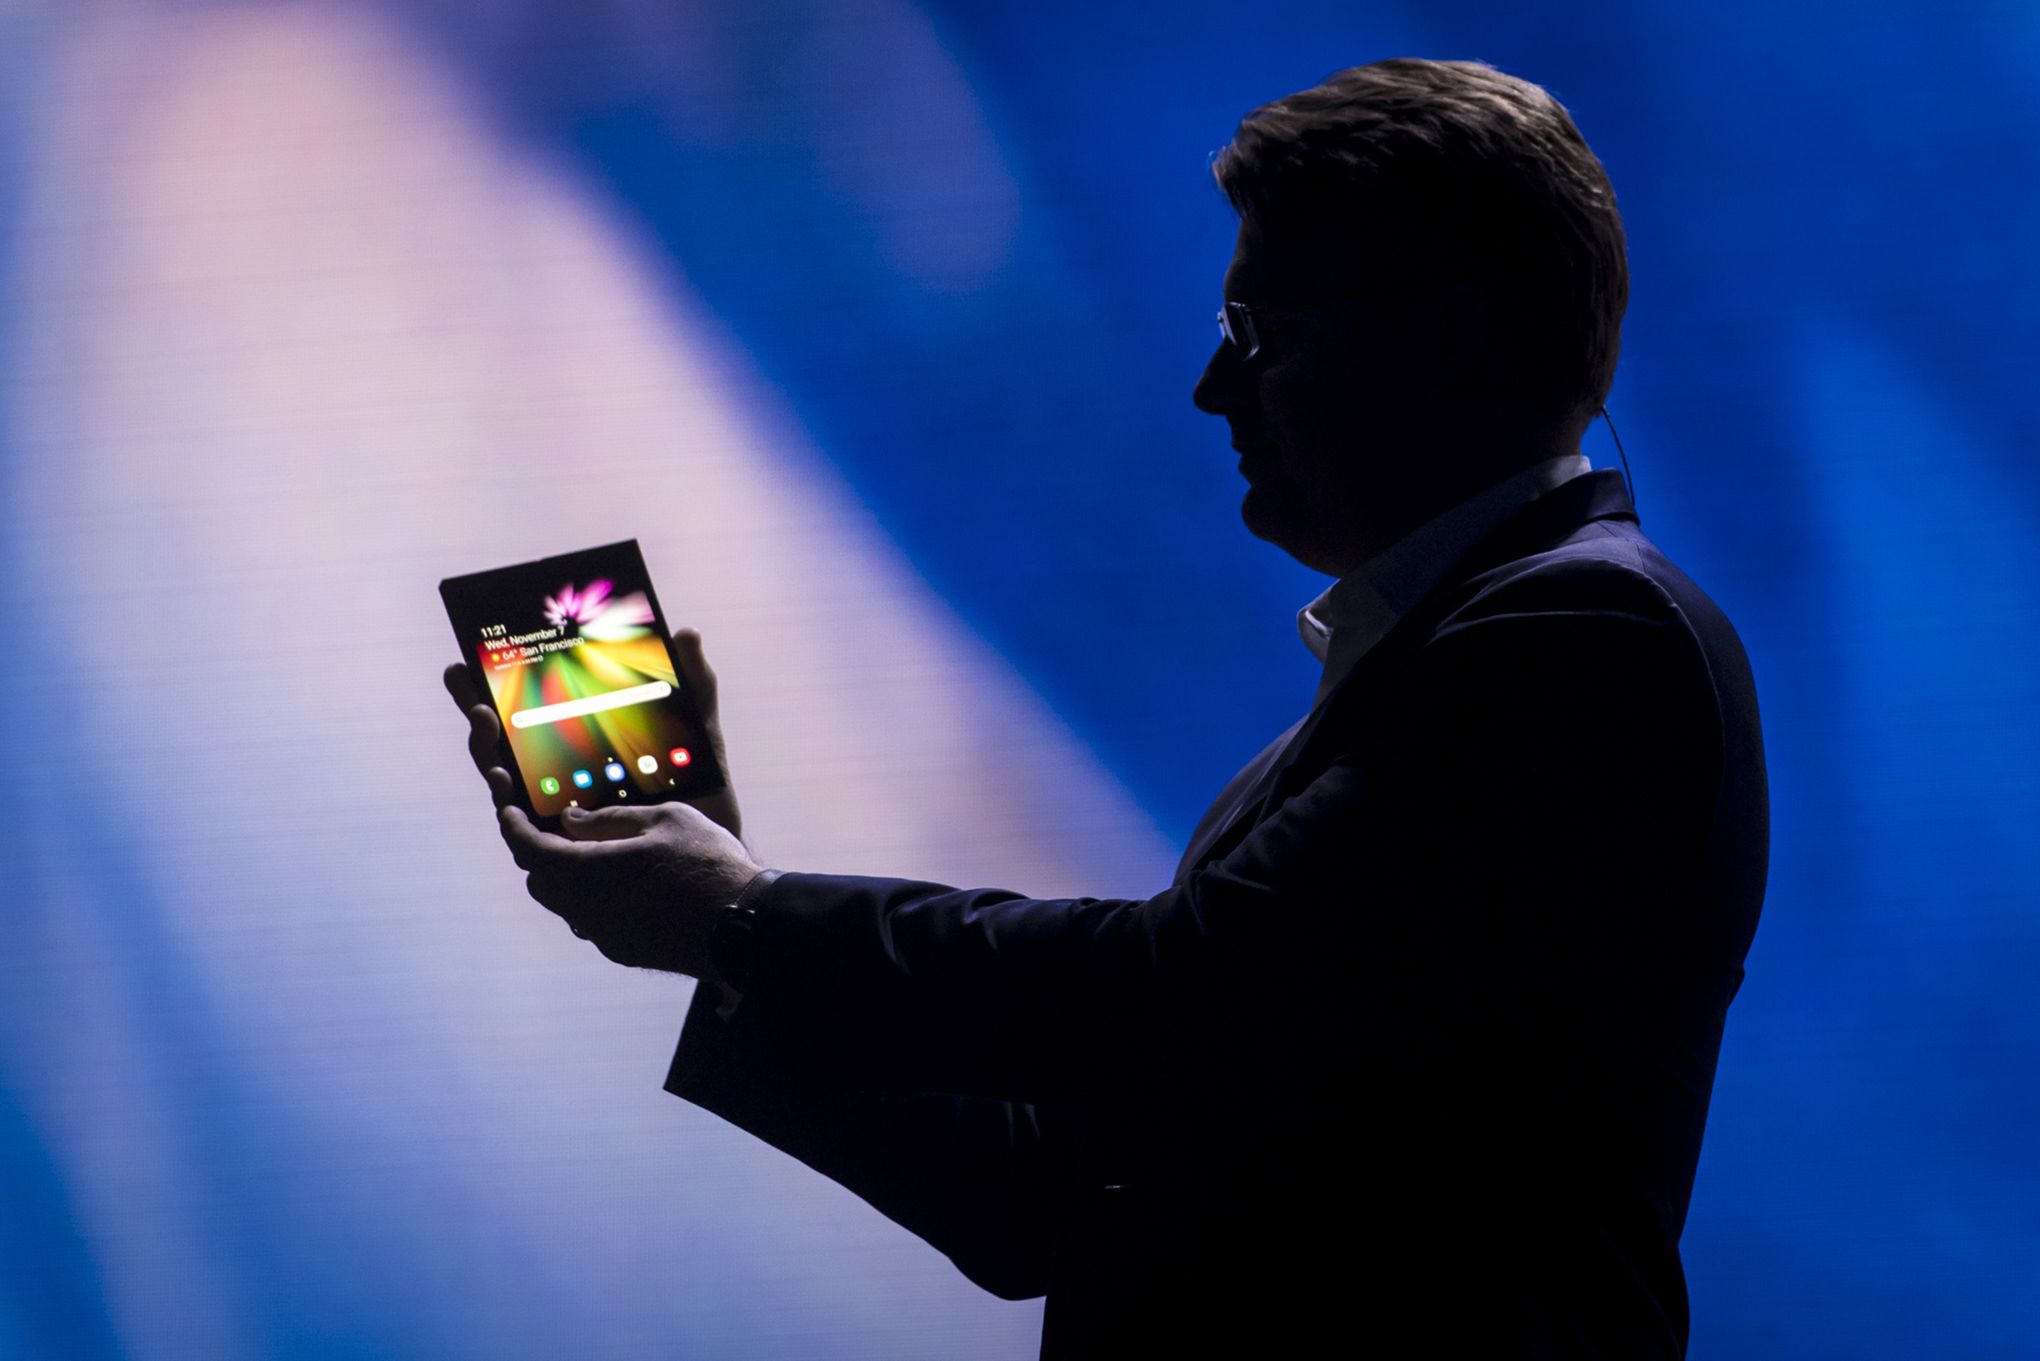 Samsung unveils Infinity Flex smartphone that unfolds to become a tablet